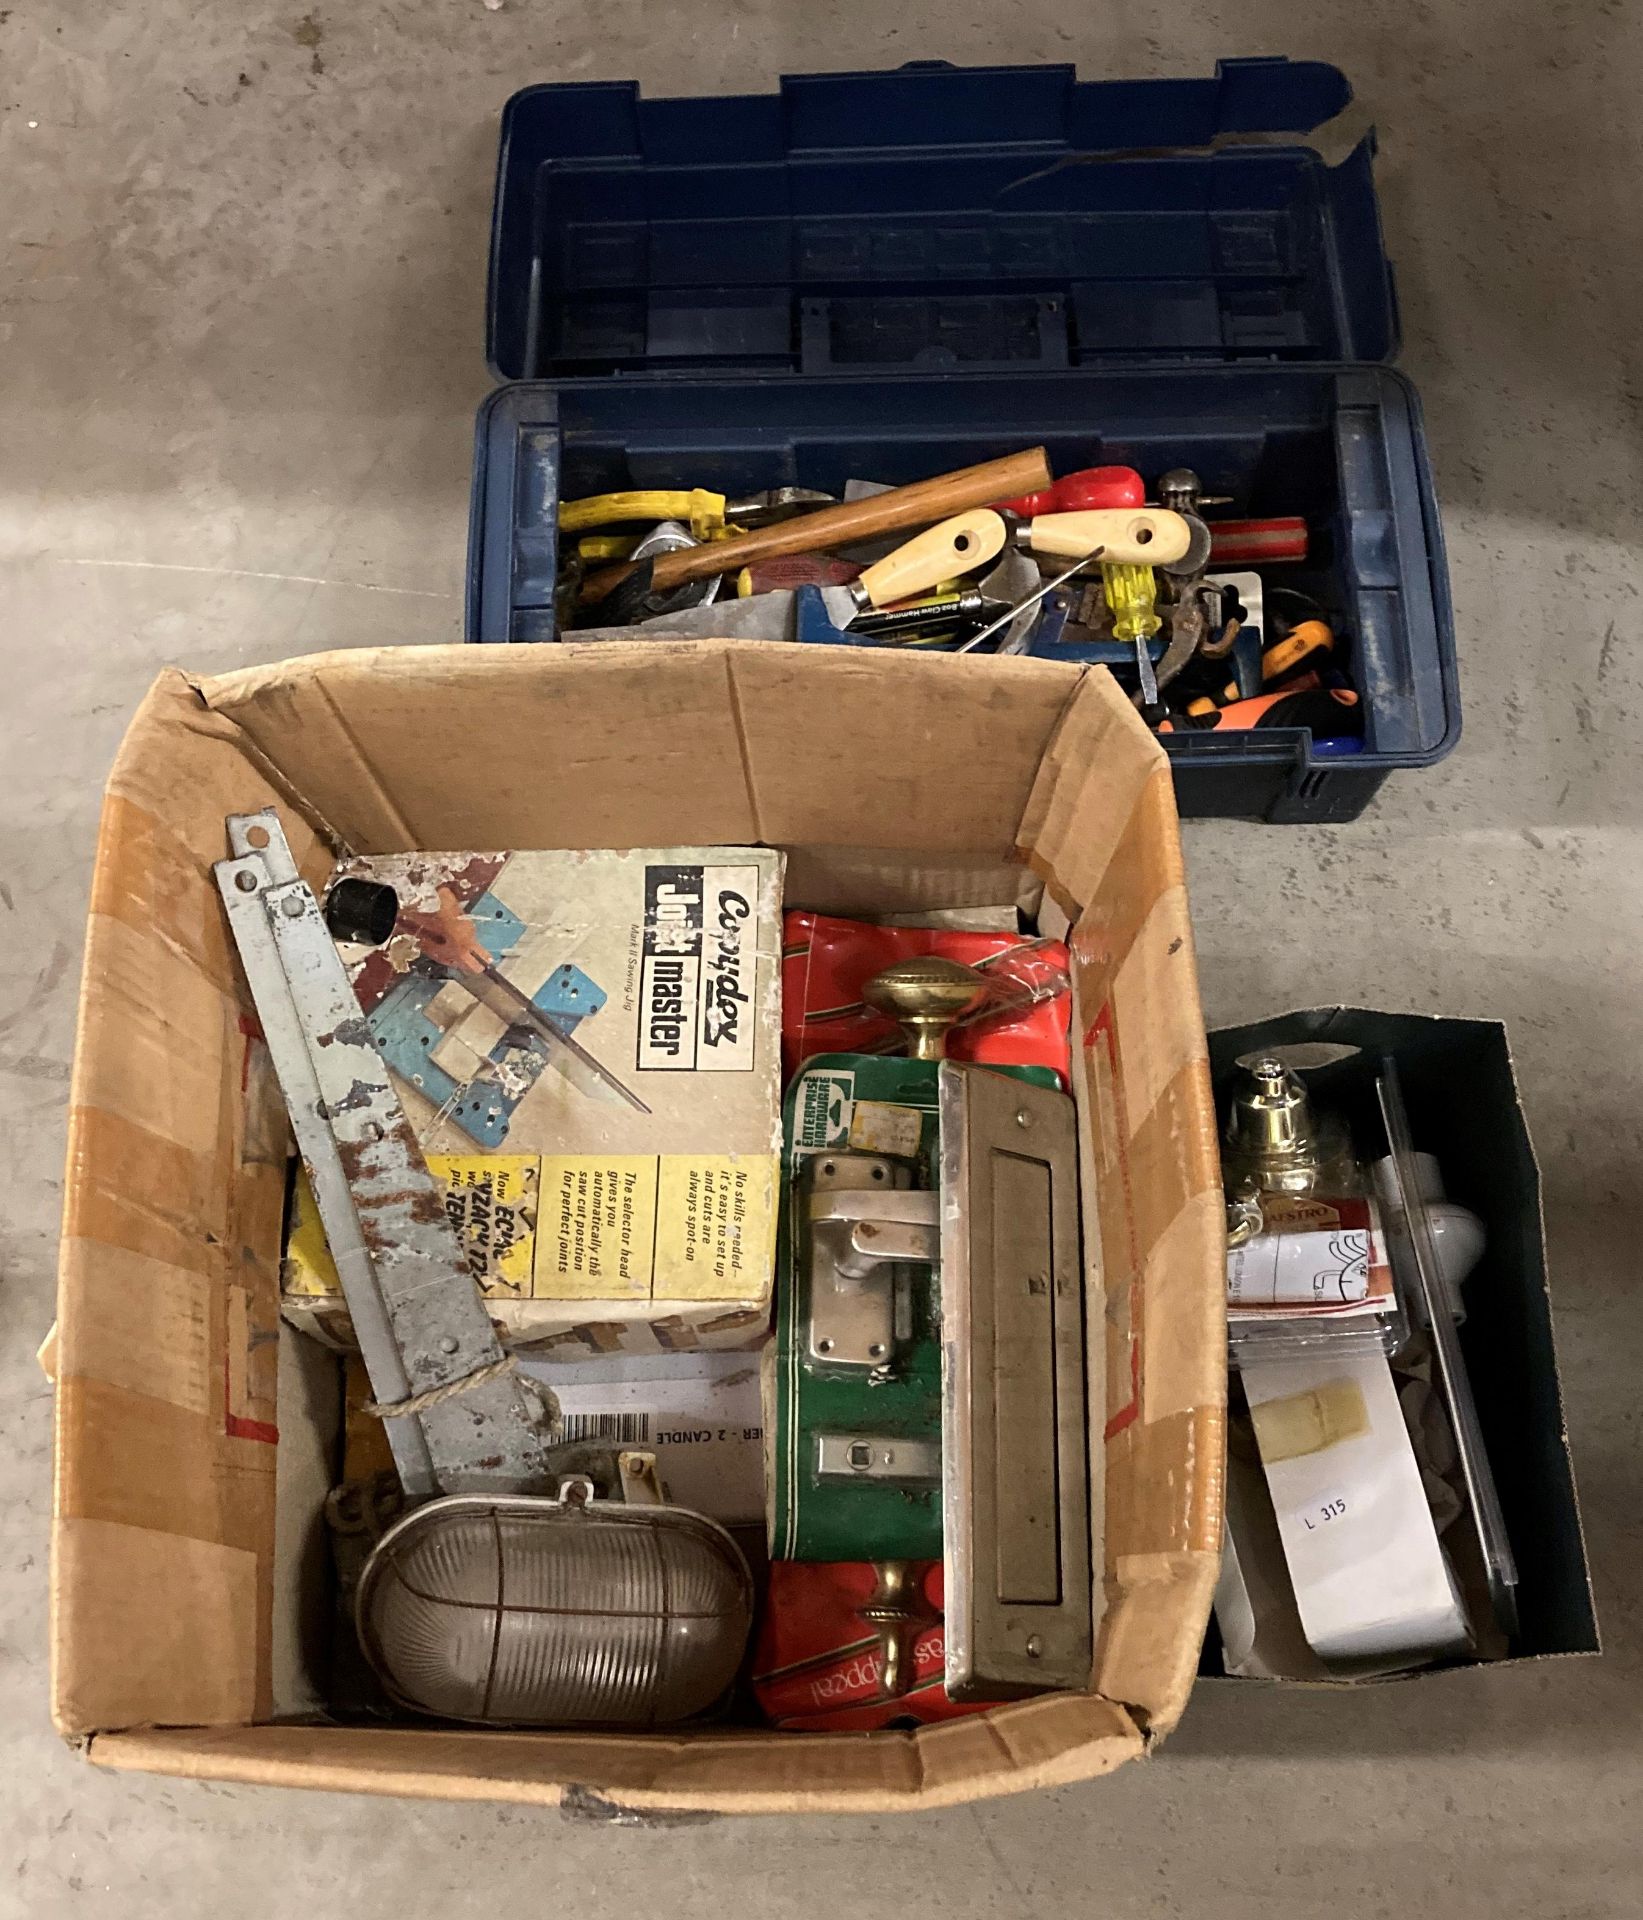 Contents to plastic tool box - sundry hand tools,